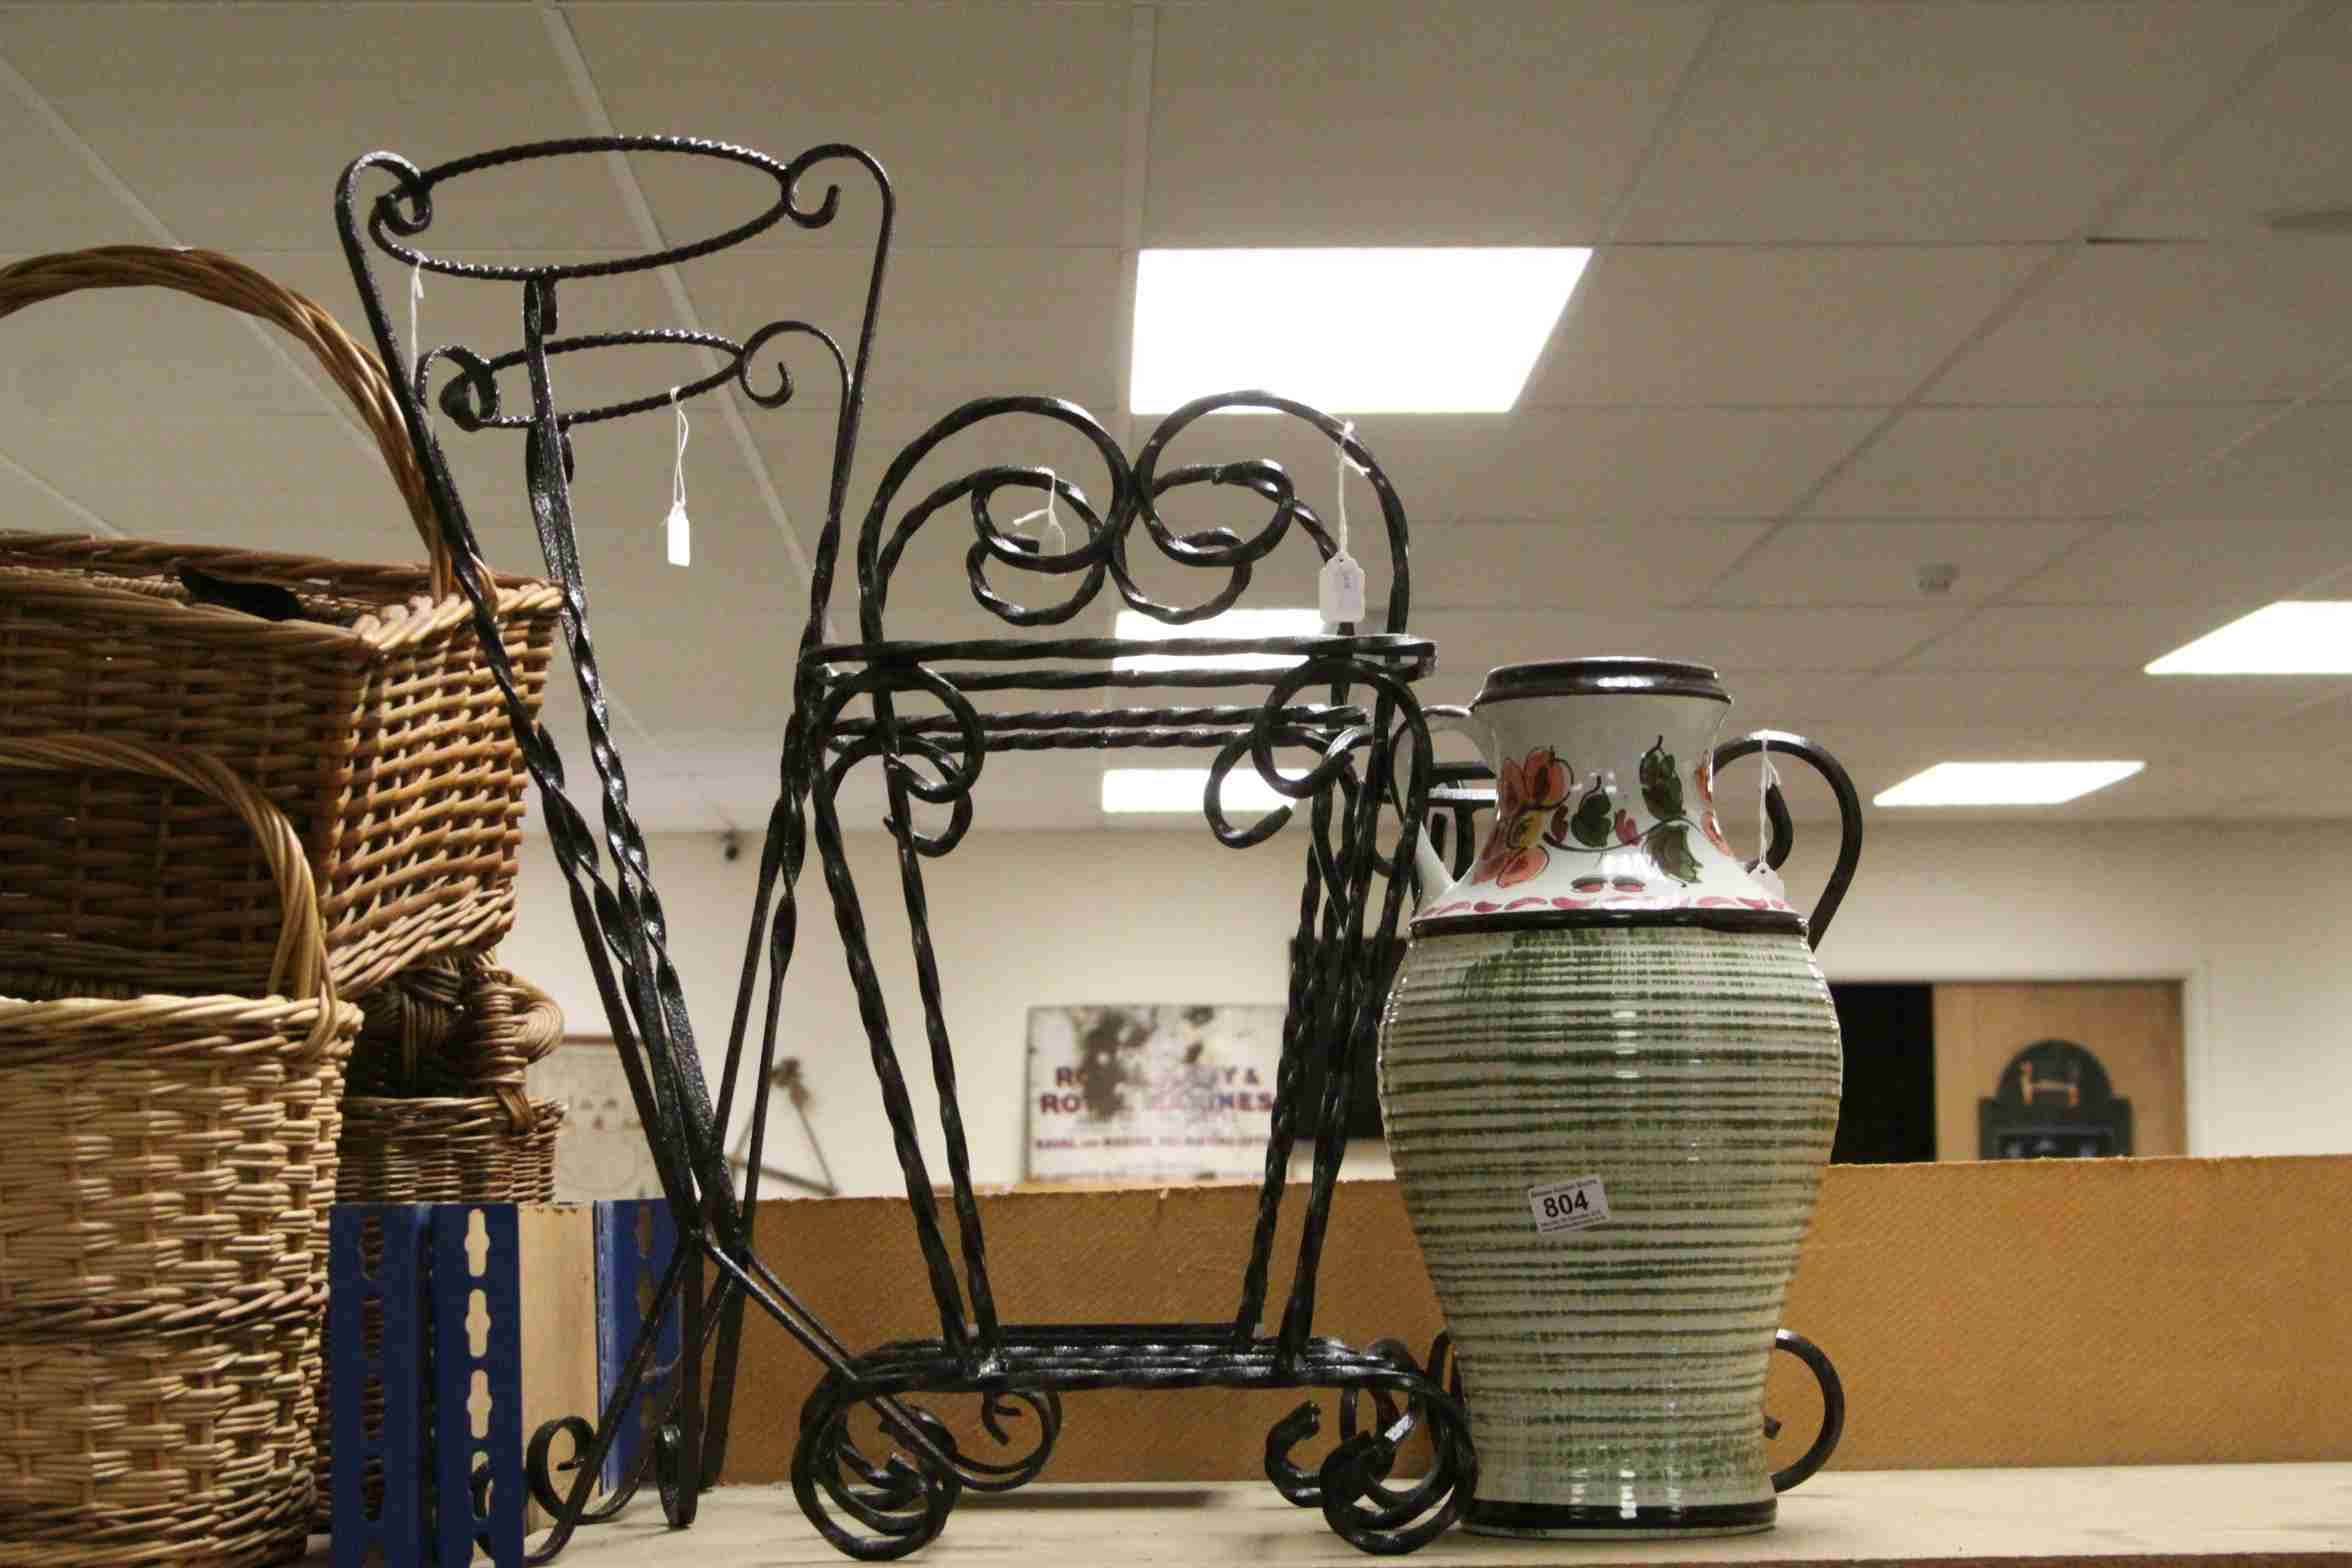 Pair of Wrought Iron Stick / Umbrella Stands, Pair of Wrought Iron Plant Pot Holders and a Ceramic